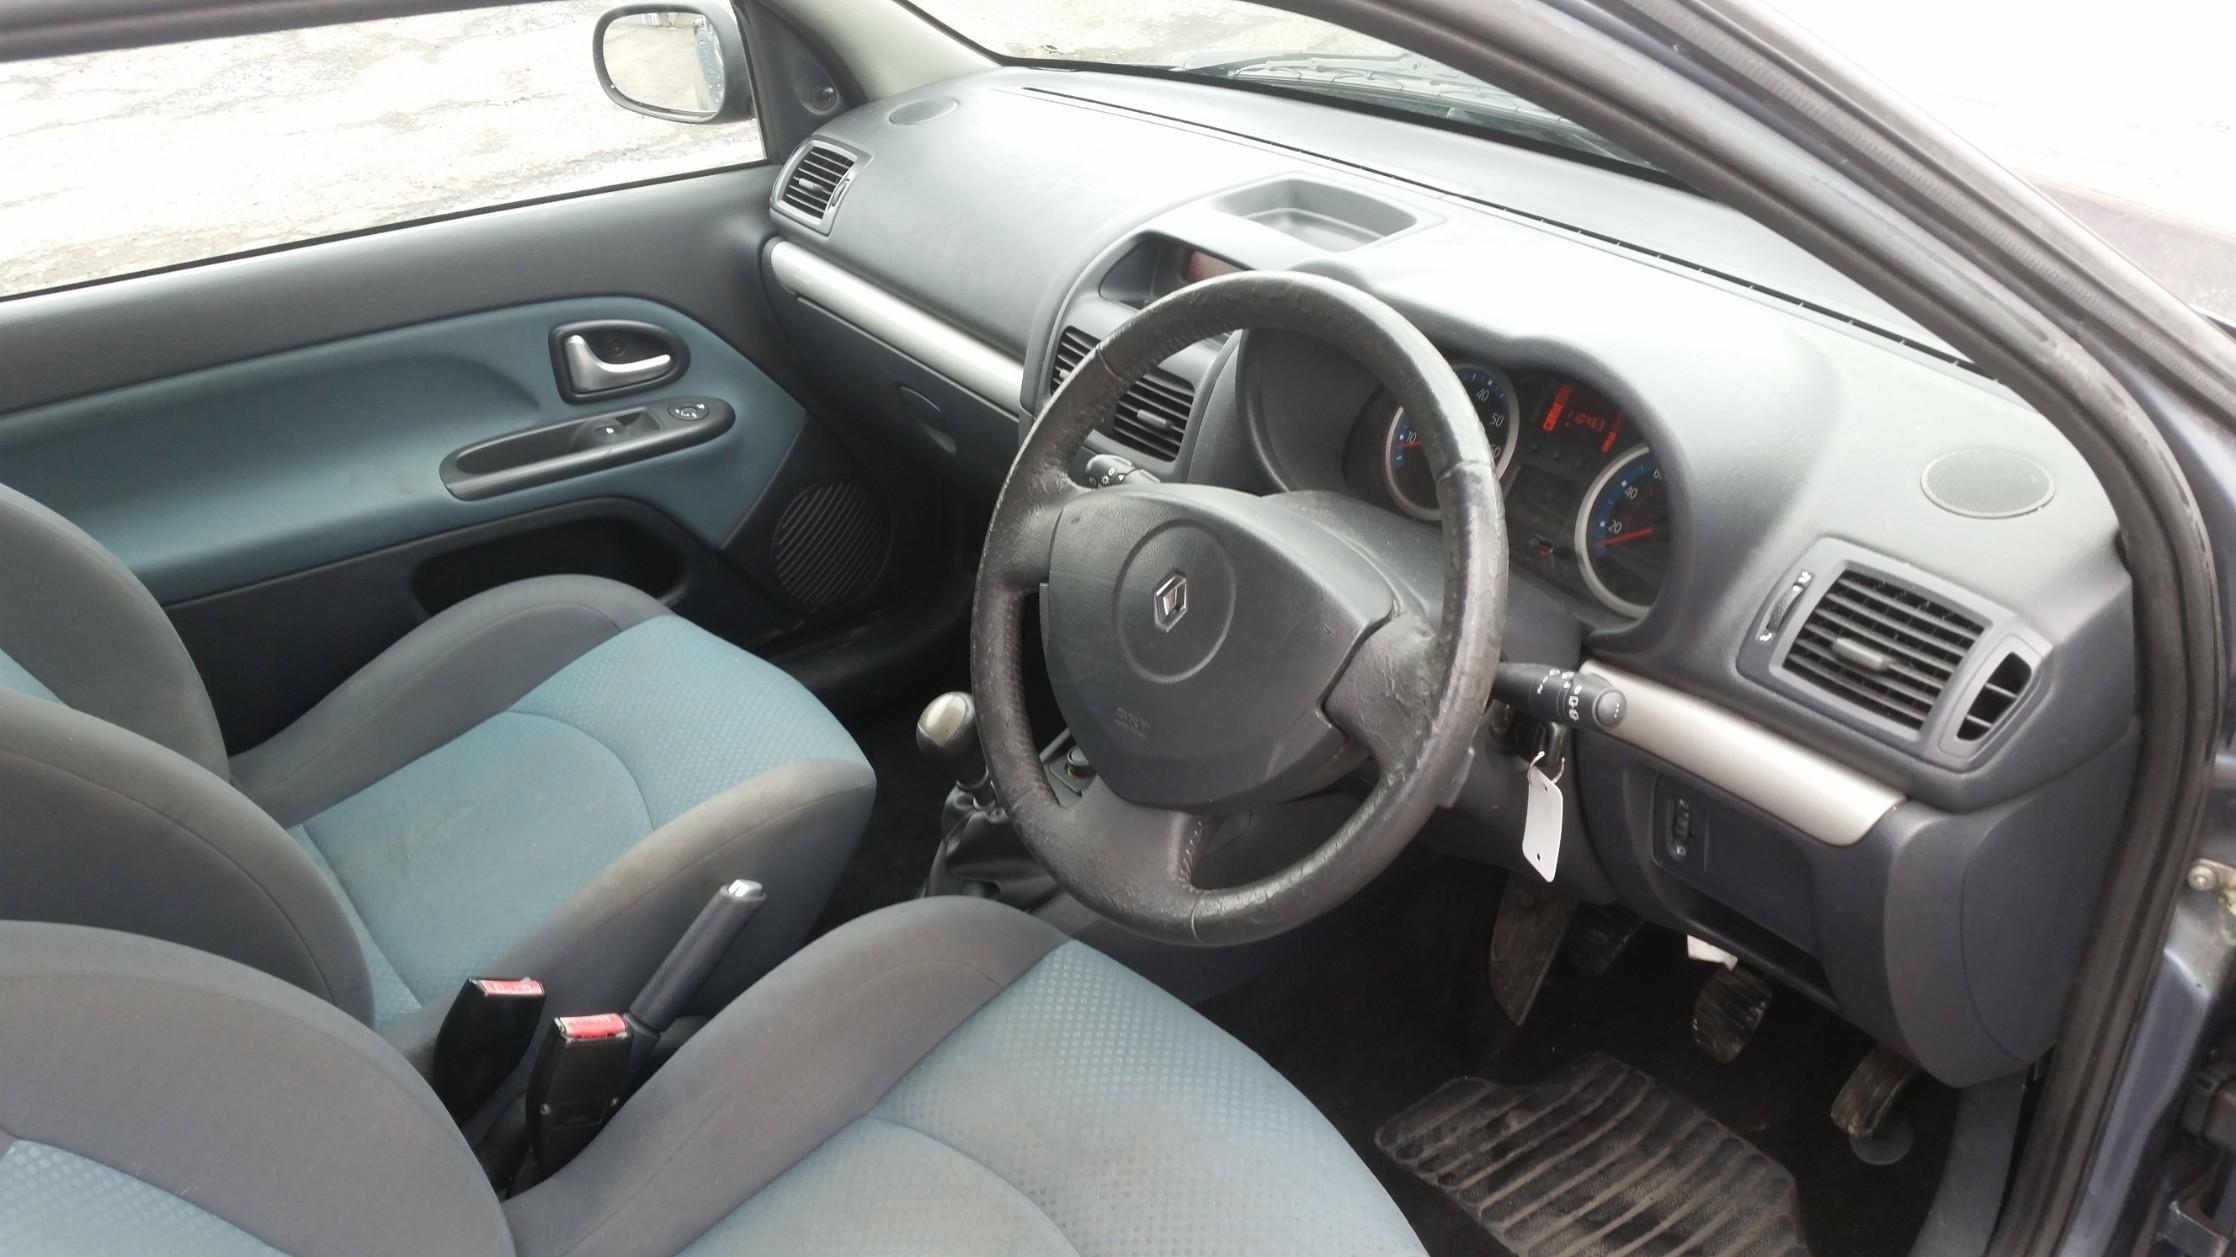 55 Reg Renault Clio 1 2 16v Extreme In Telford For 595 00 For Sale Shpock